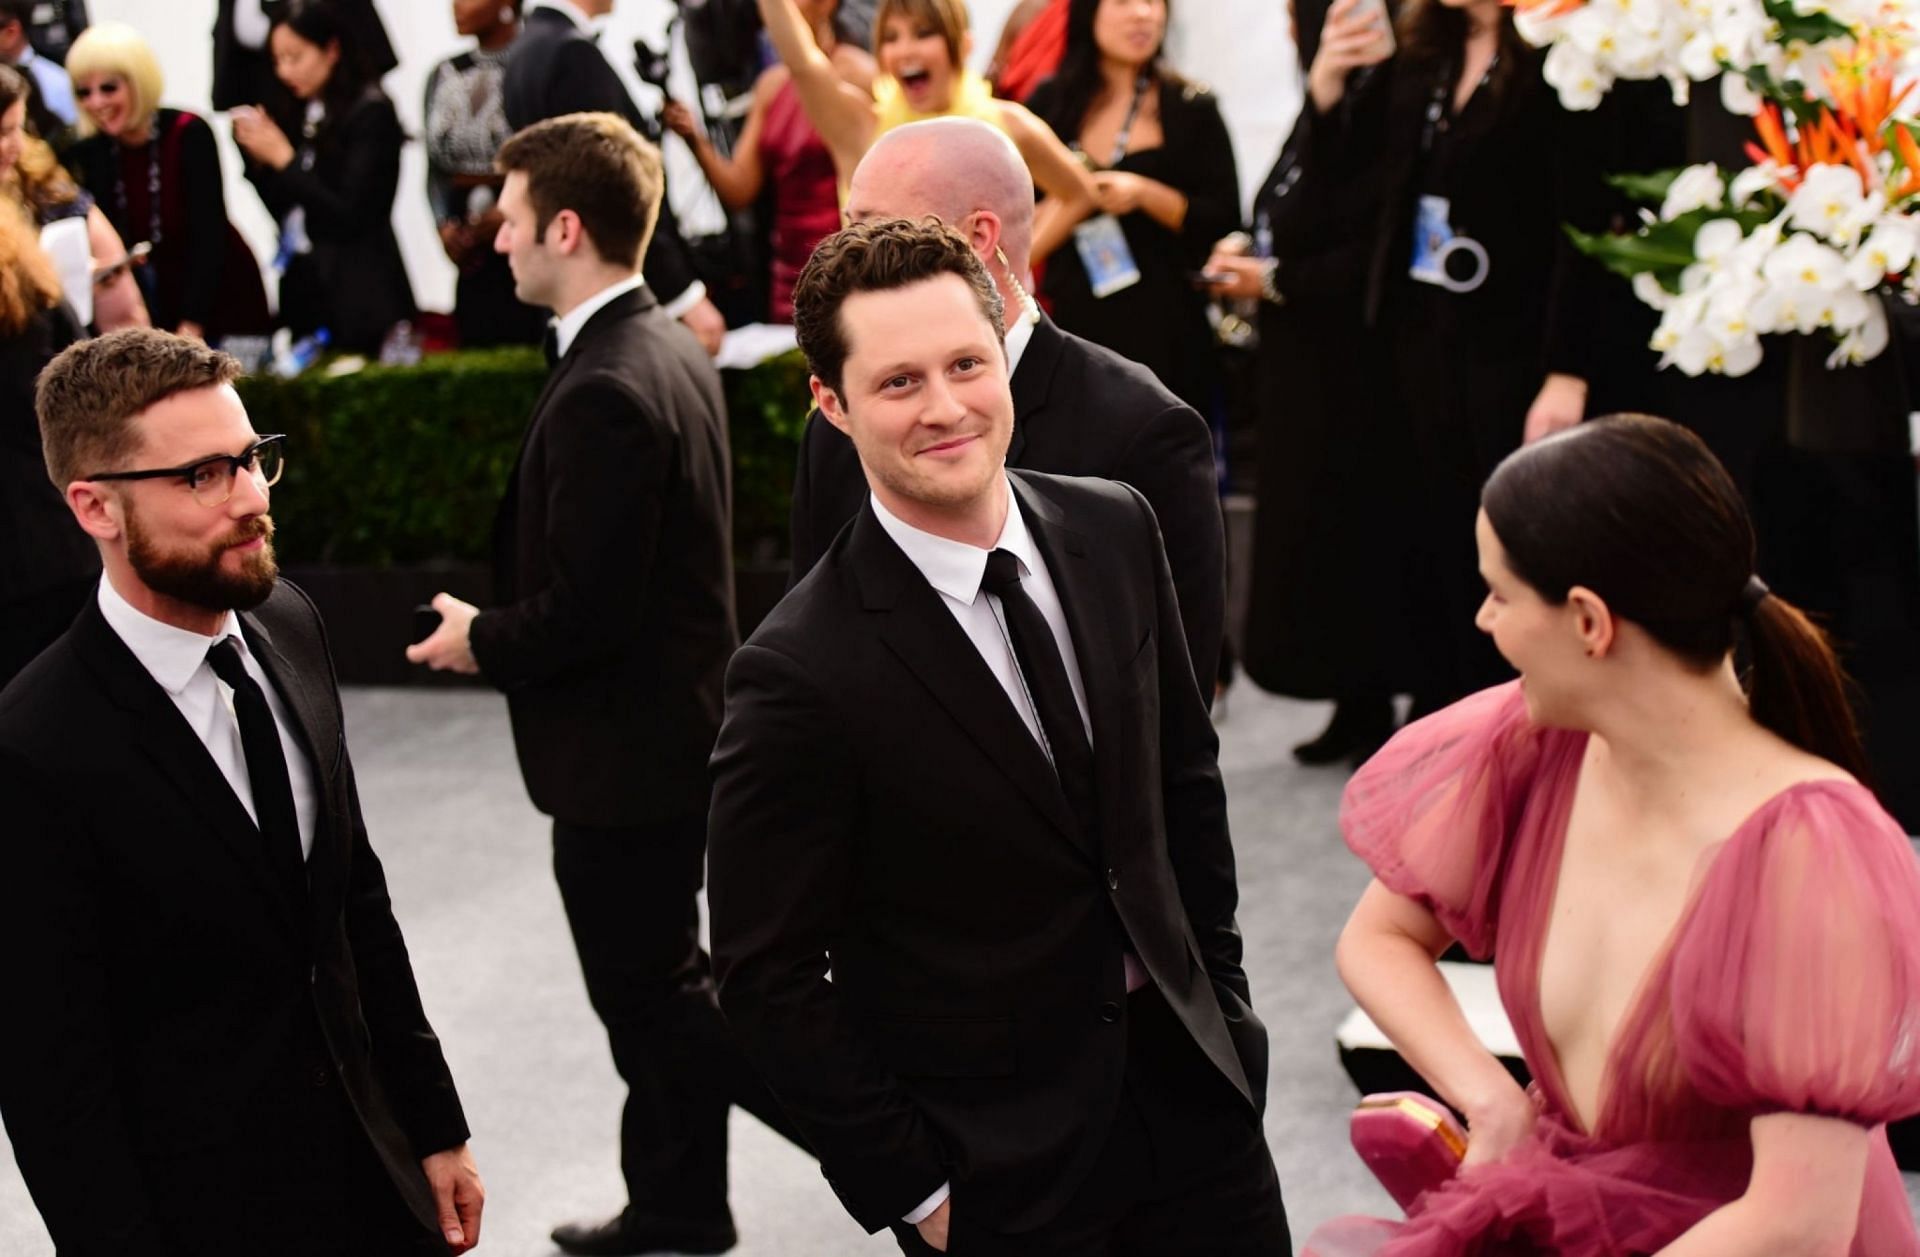 Noah Reid (Centre) at the 26th annual Screen Actors Guild Awards at The Shrine Auditorium on January 19, 2020 in Los Angeles, California.(Image via Getty Images)